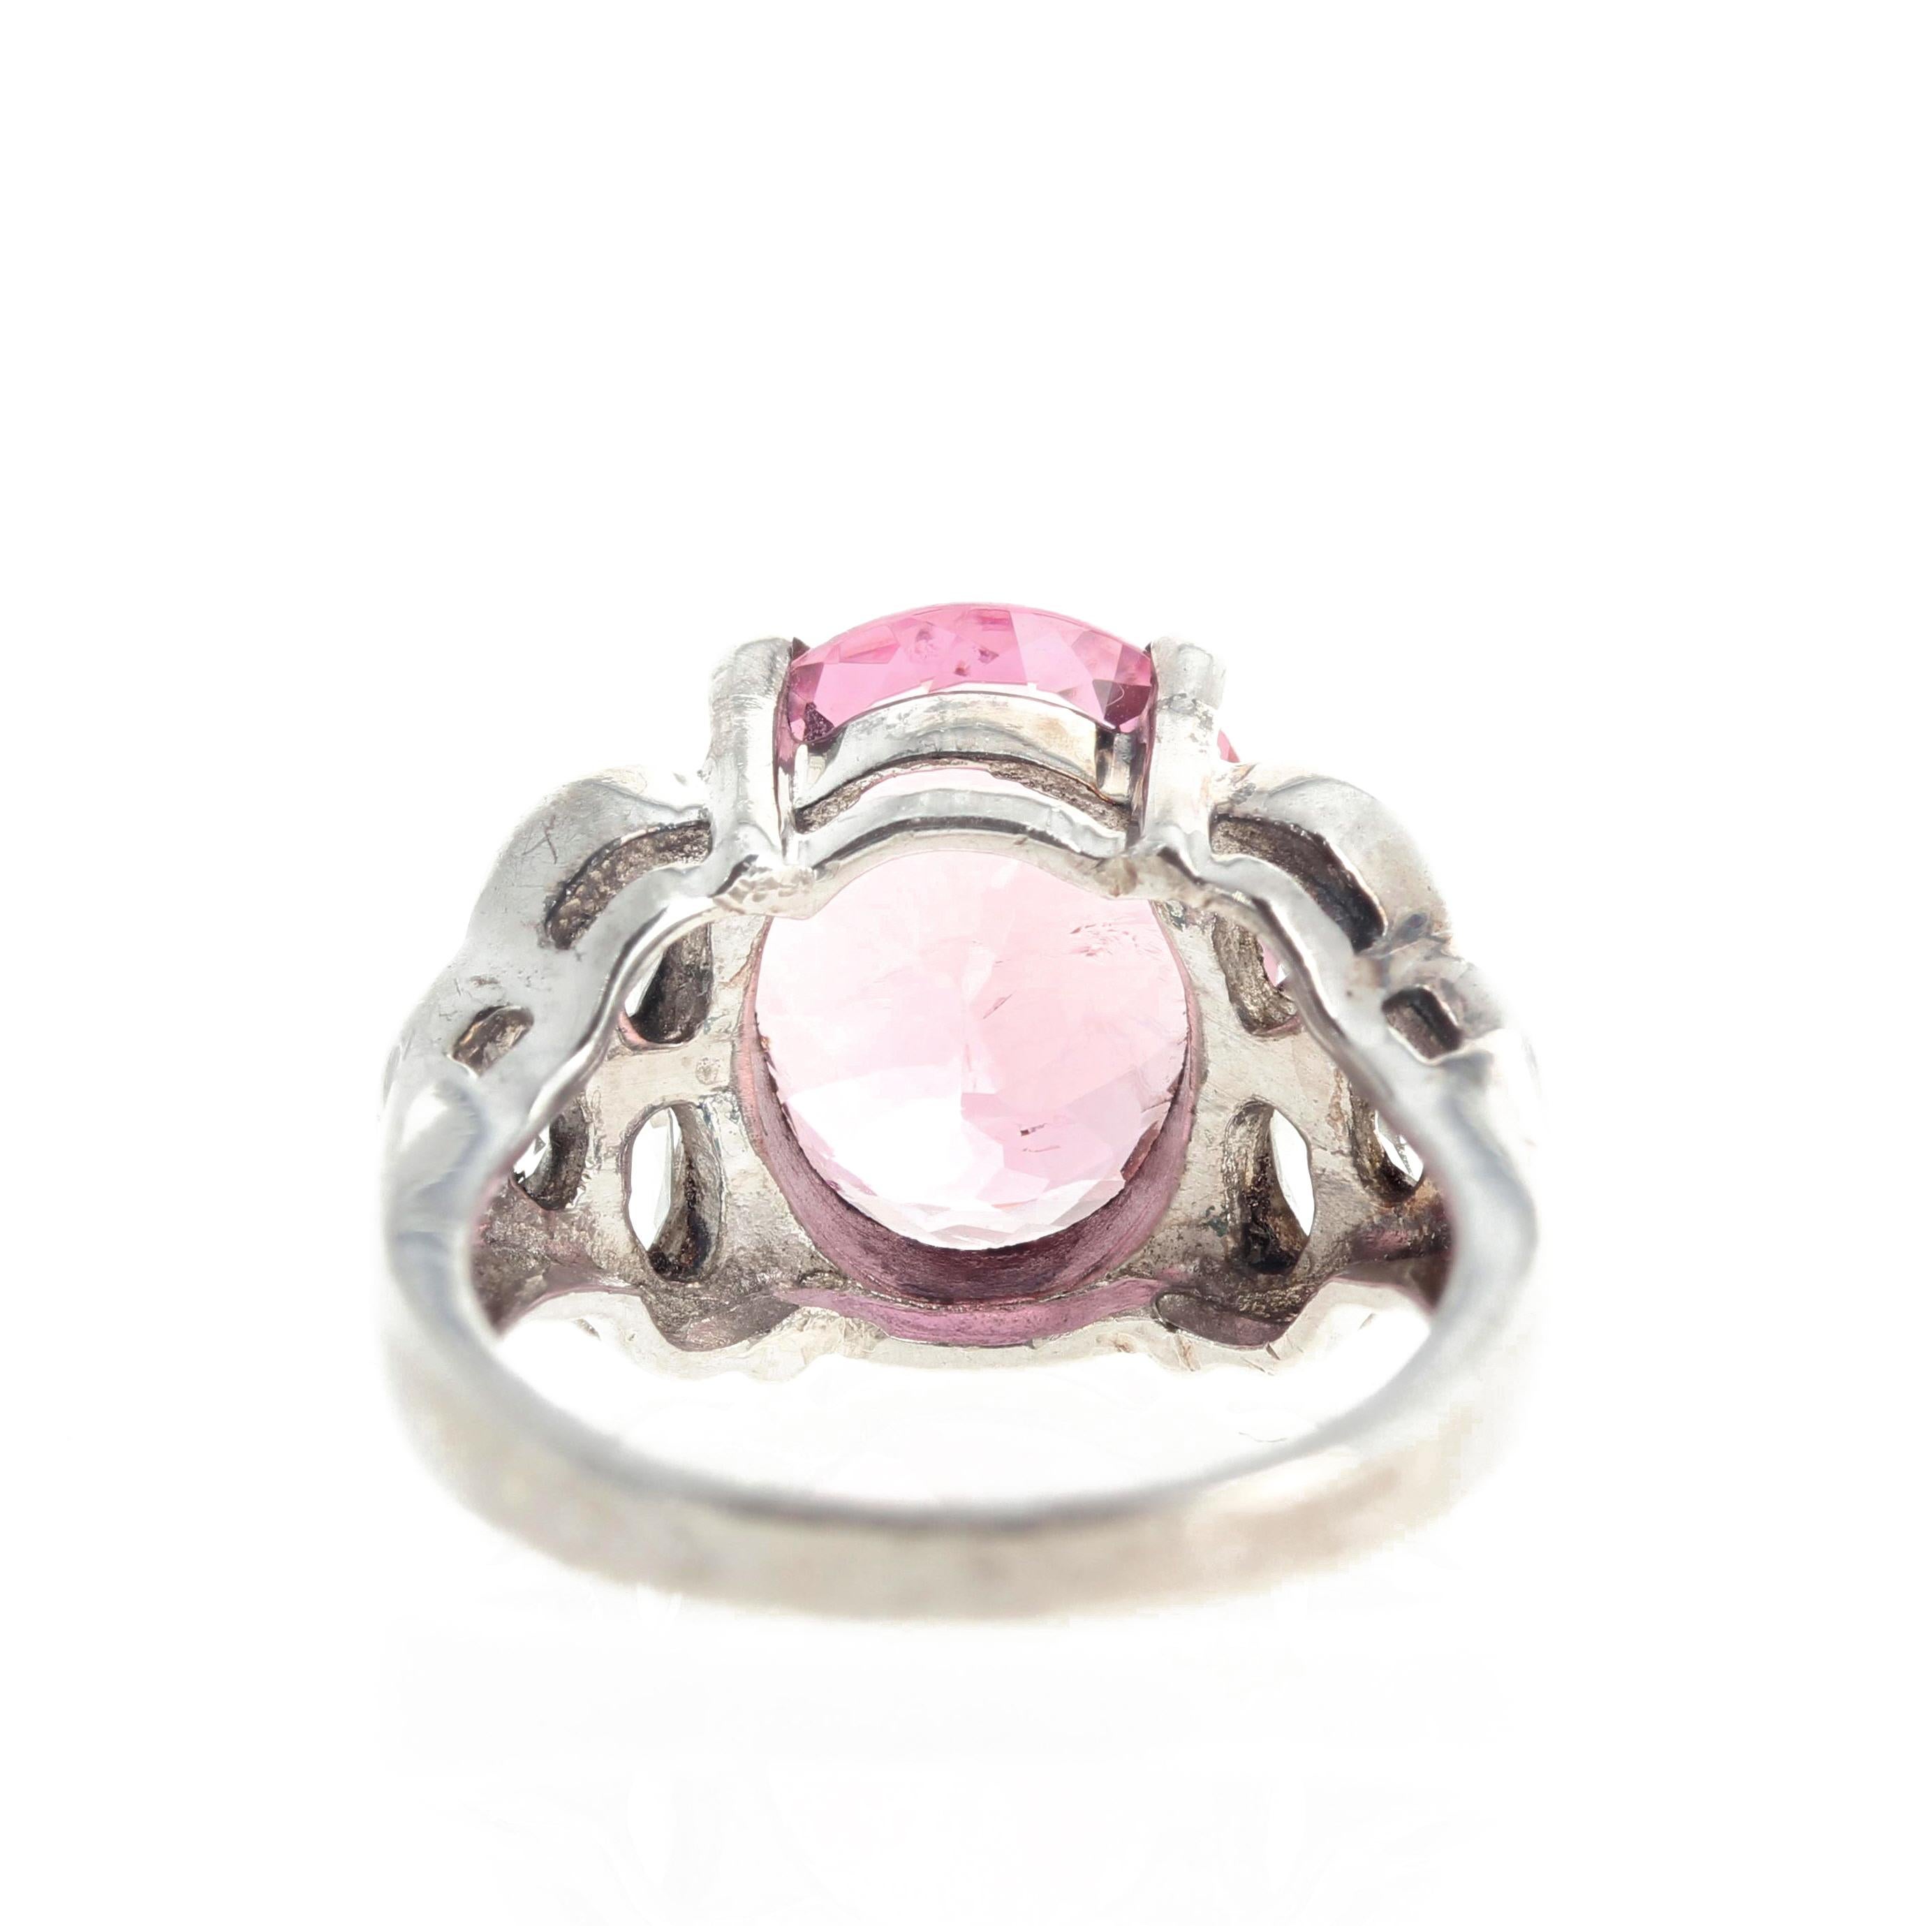 Women's or Men's AJD Beautiful 4 Cts Sparkling Pink Tourmaline & Silver Quartz Silver Ring For Sale